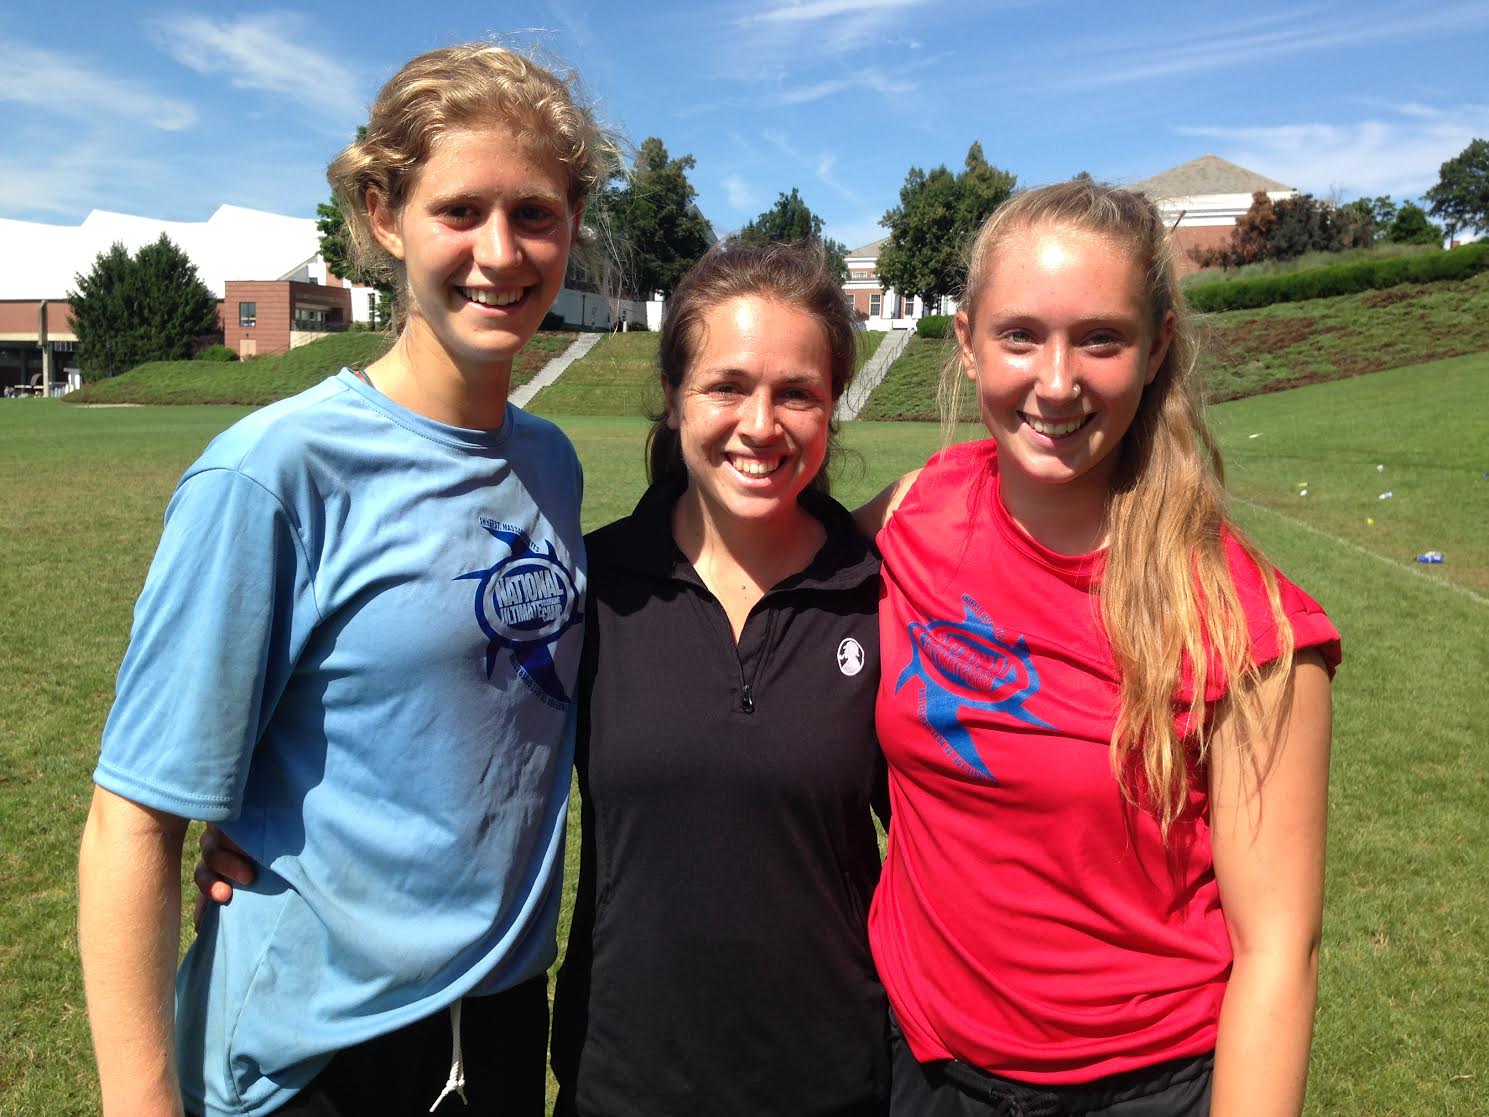 Sophia Herscu and two NUTC campers together at NUTC 2014.